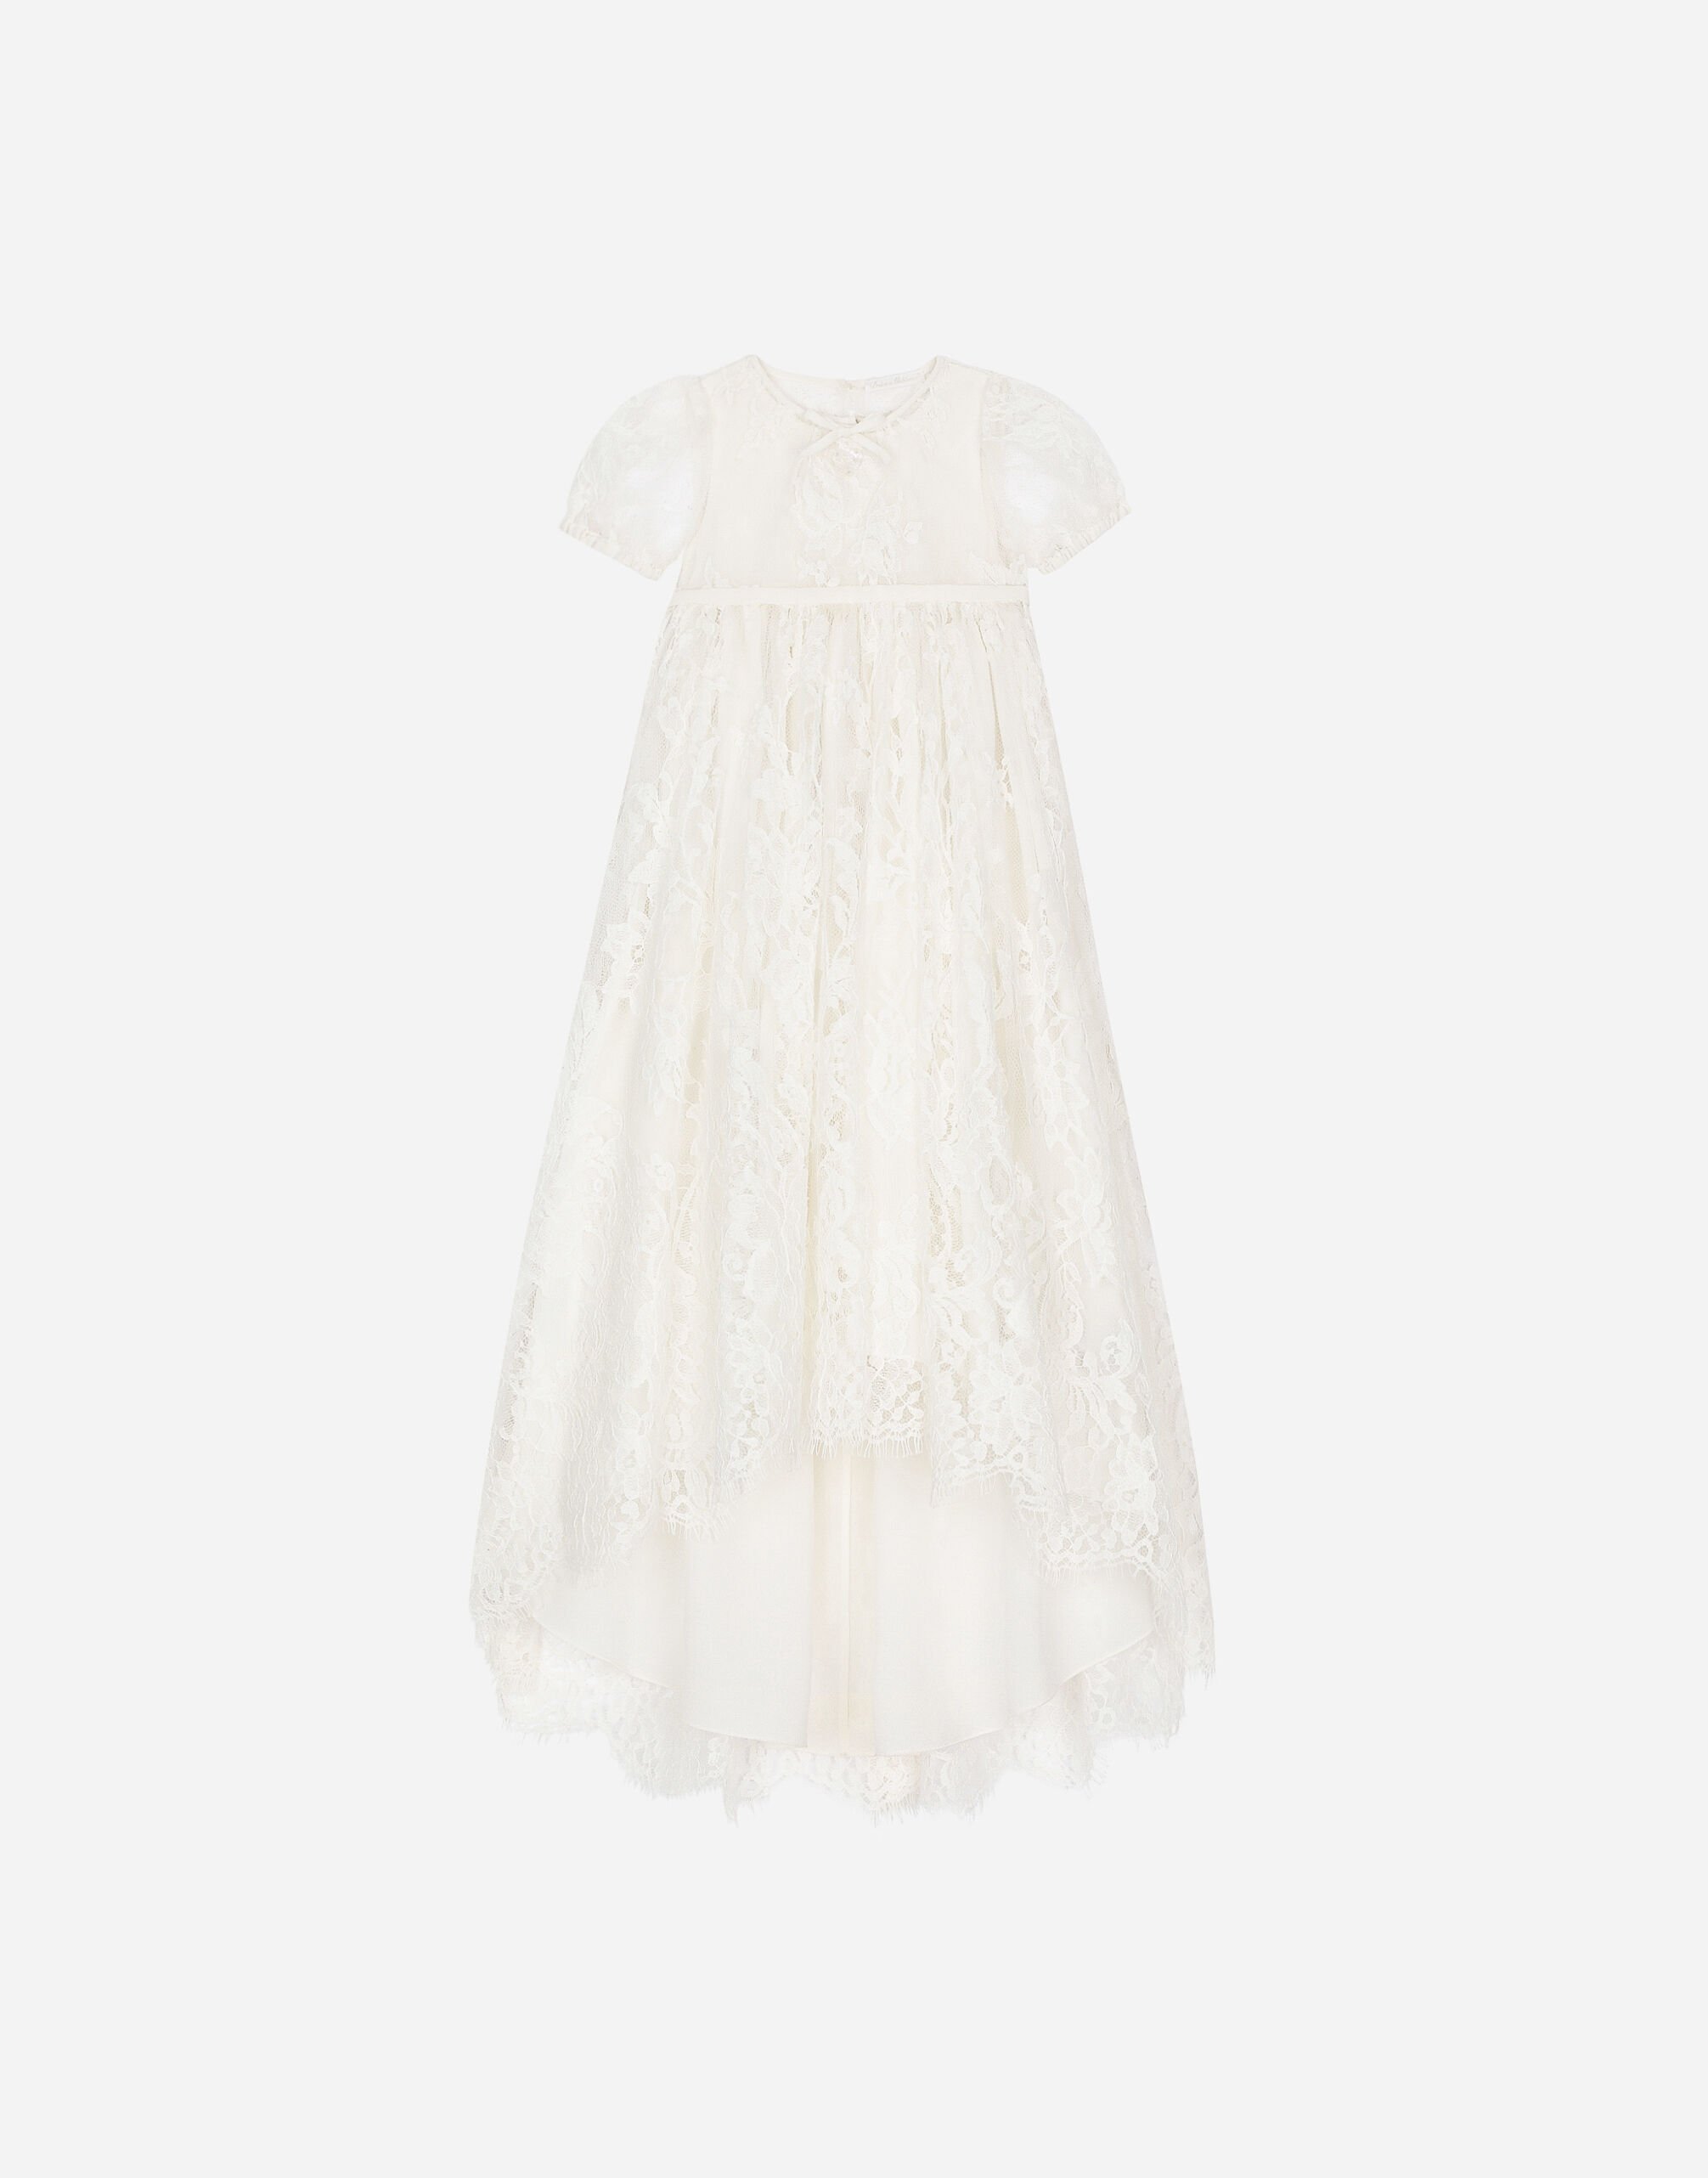 Dolce & Gabbana Empire-line ramage Chantilly lace christening dress with short sleeves Black LB1A58G0U05